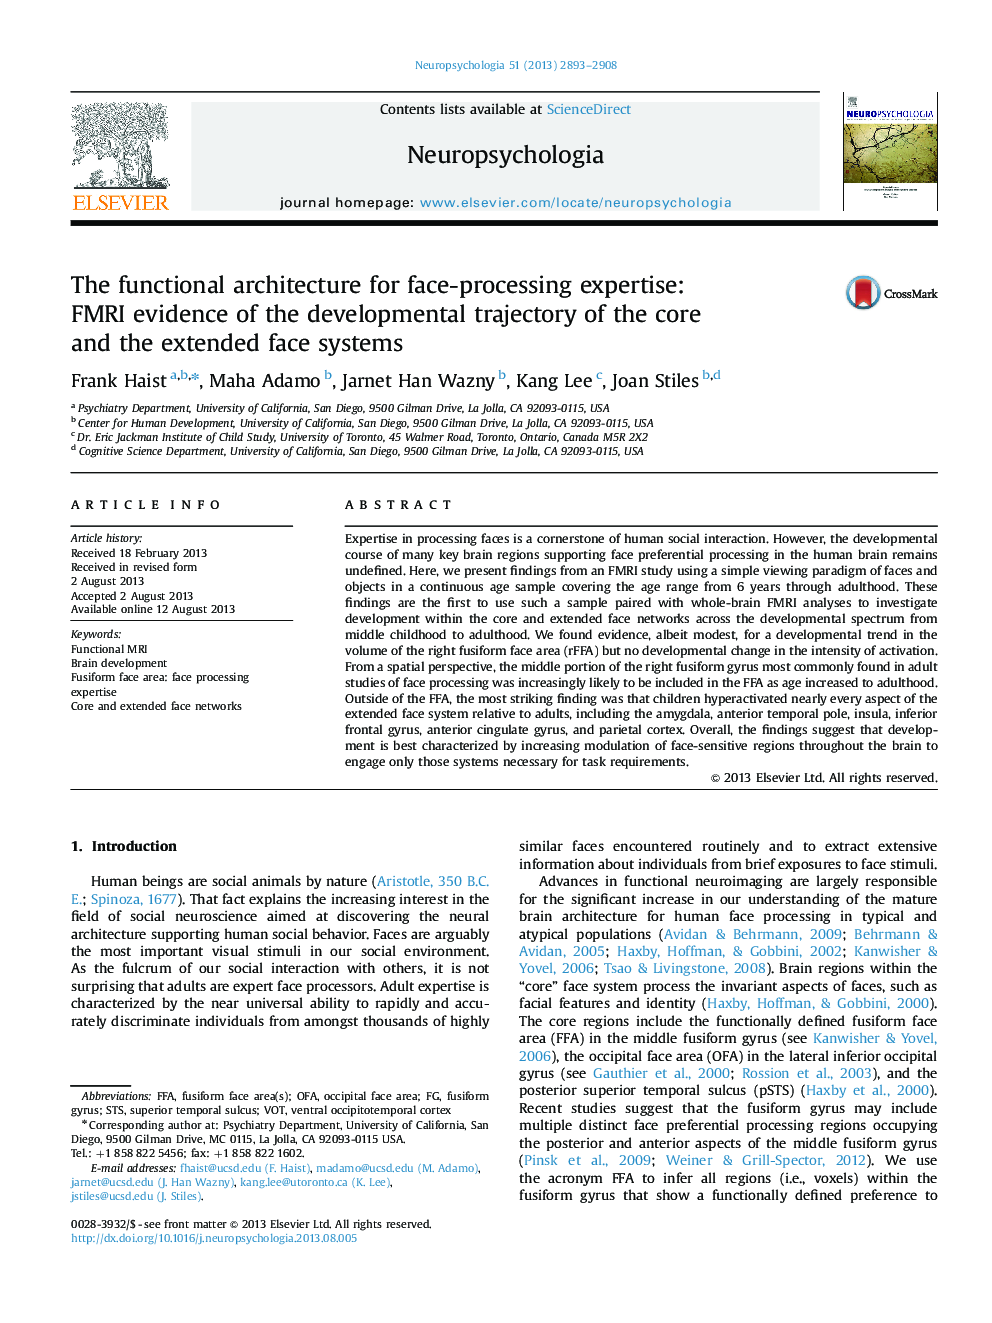 The functional architecture for face-processing expertise: FMRI evidence of the developmental trajectory of the core and the extended face systems